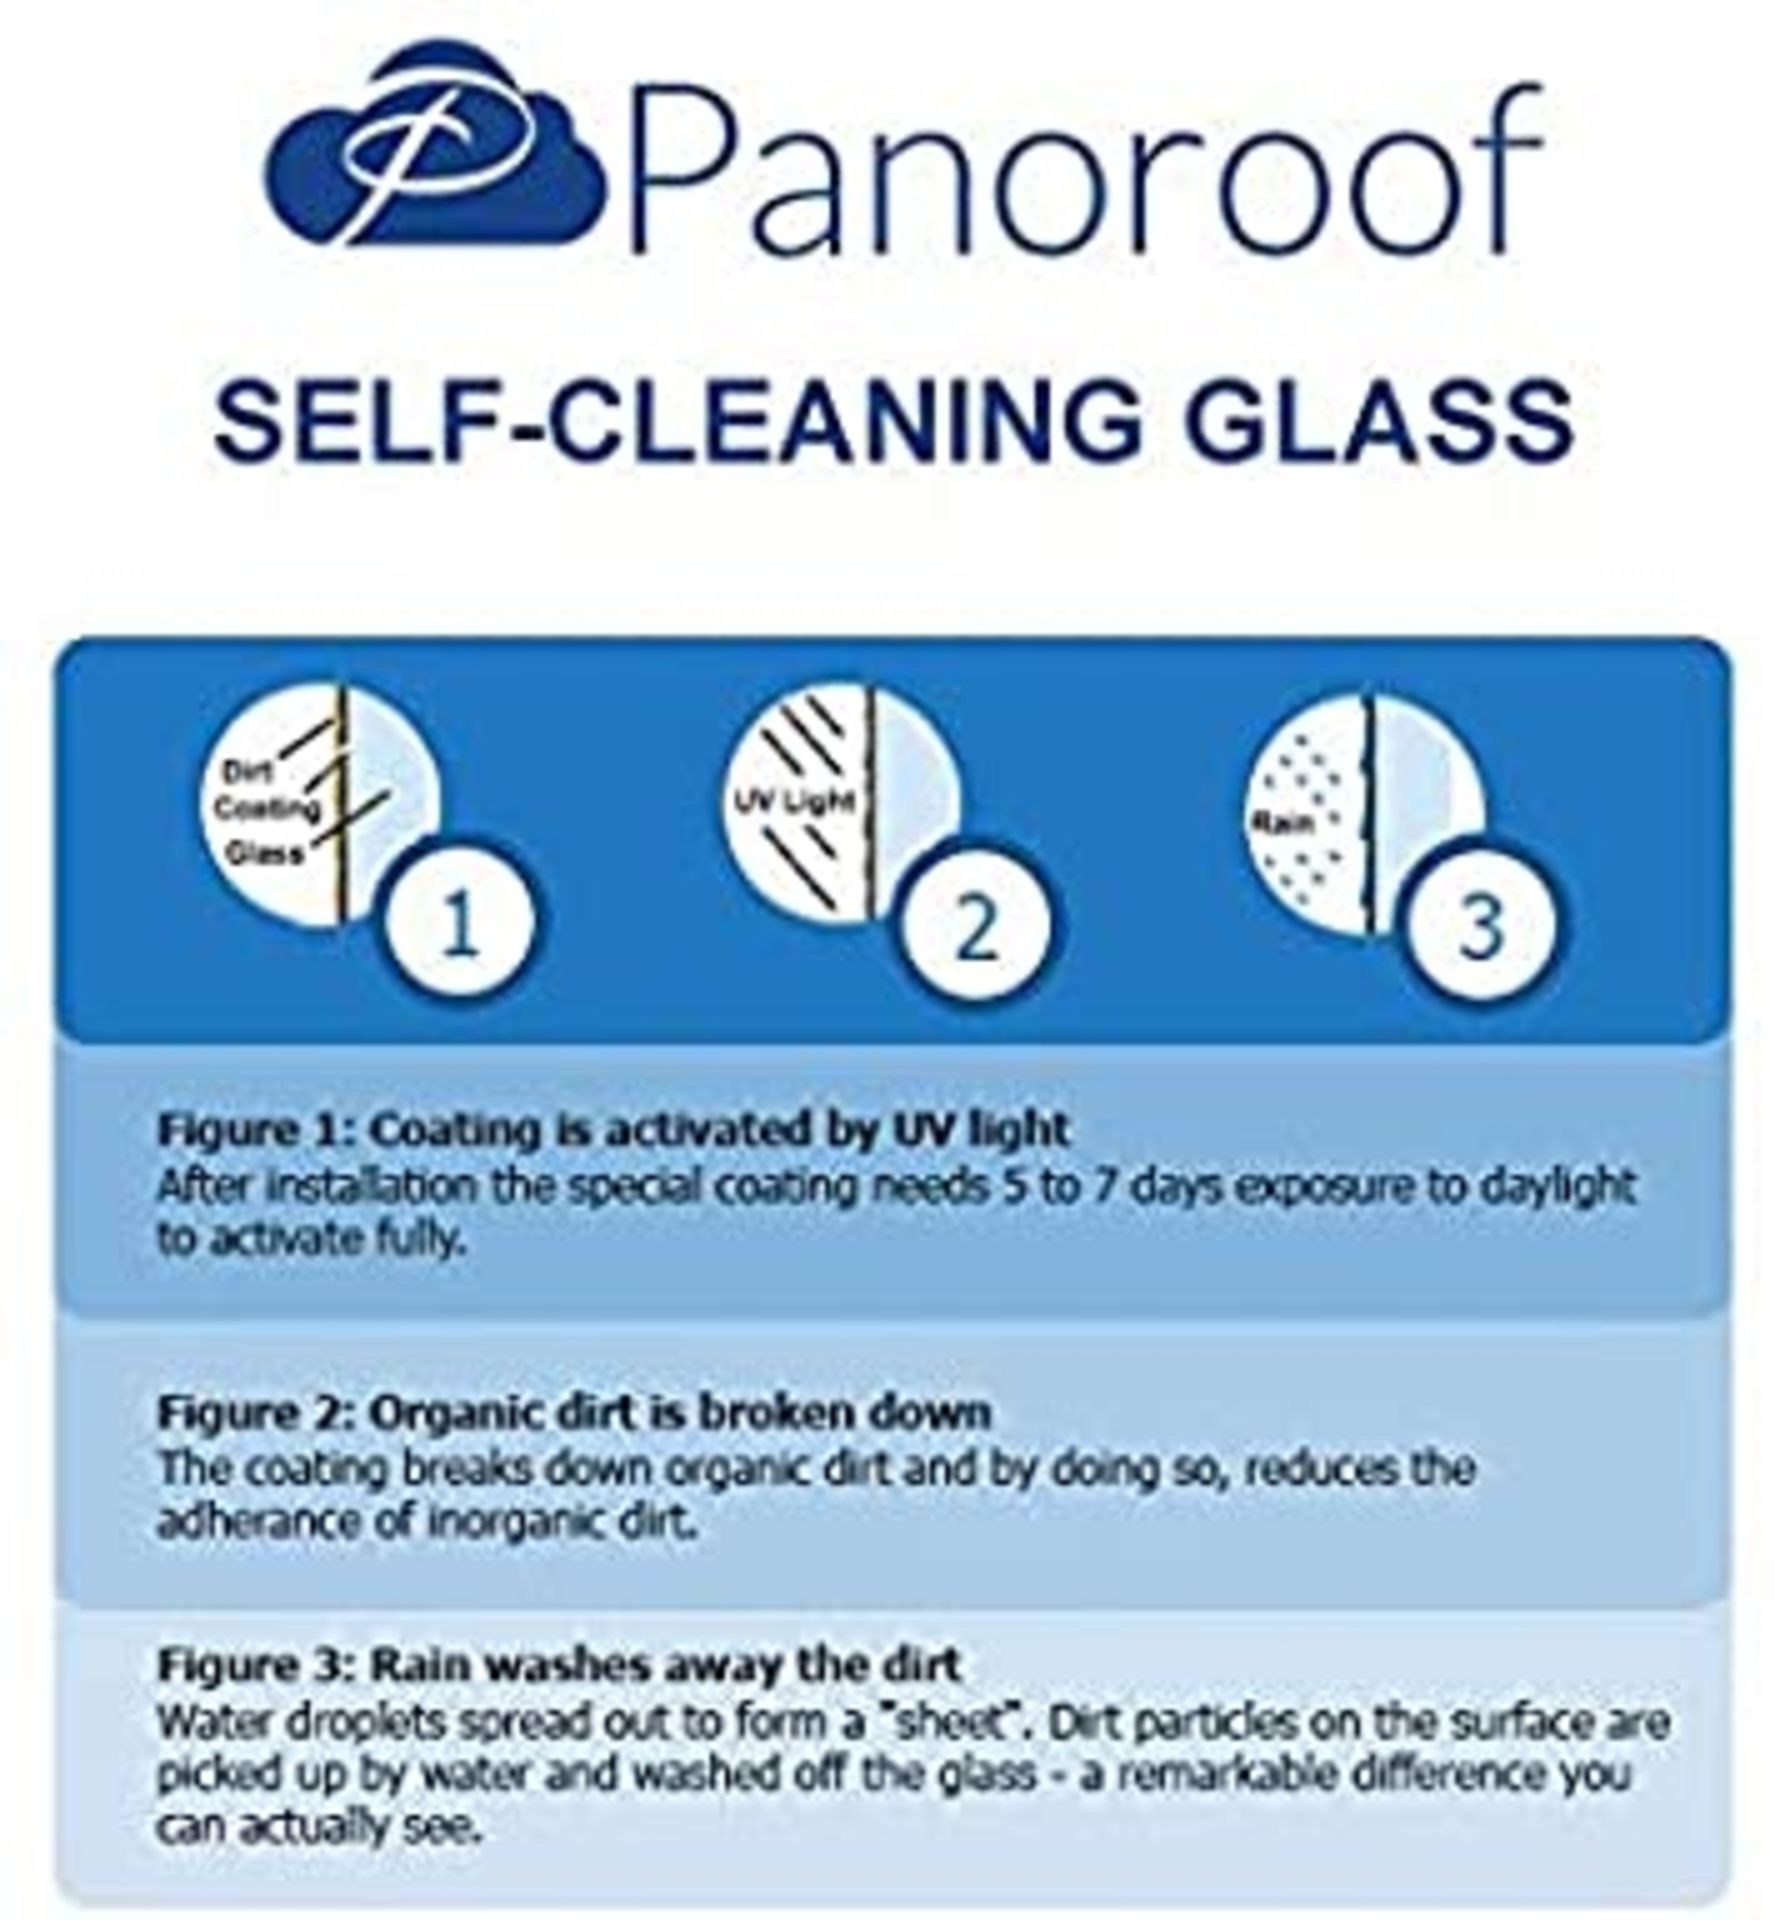 """Panoroof Triple Glazed Self Cleaning 800x1500mm (inside Size Visable glass area) Seamless Glass - Image 6 of 6